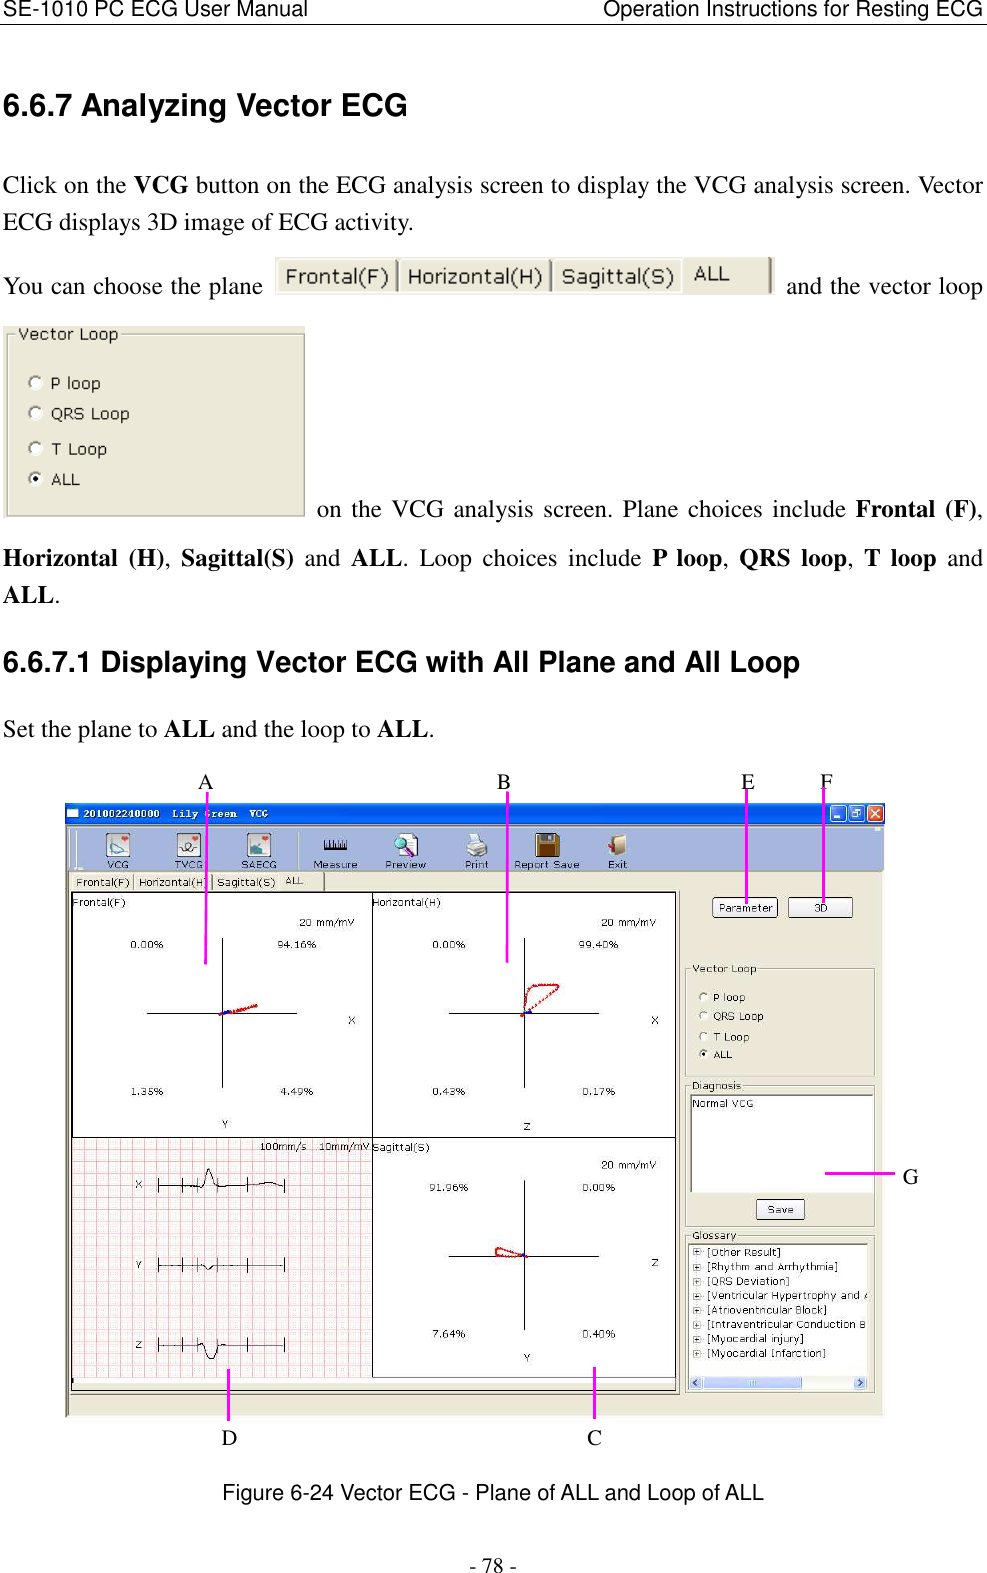 SE-1010 PC ECG User Manual                                                      Operation Instructions for Resting ECG - 78 - 6.6.7 Analyzing Vector ECG Click on the VCG button on the ECG analysis screen to display the VCG analysis screen. Vector ECG displays 3D image of ECG activity. You can choose the plane    and the vector loop   on the VCG analysis screen. Plane choices include Frontal (F), Horizontal  (H),  Sagittal(S)  and  ALL.  Loop  choices  include  P  loop,  QRS  loop,  T  loop  and ALL. 6.6.7.1 Displaying Vector ECG with All Plane and All Loop Set the plane to ALL and the loop to ALL.  Figure 6-24 Vector ECG - Plane of ALL and Loop of ALL             D                                C             A                          B                     E      F G 